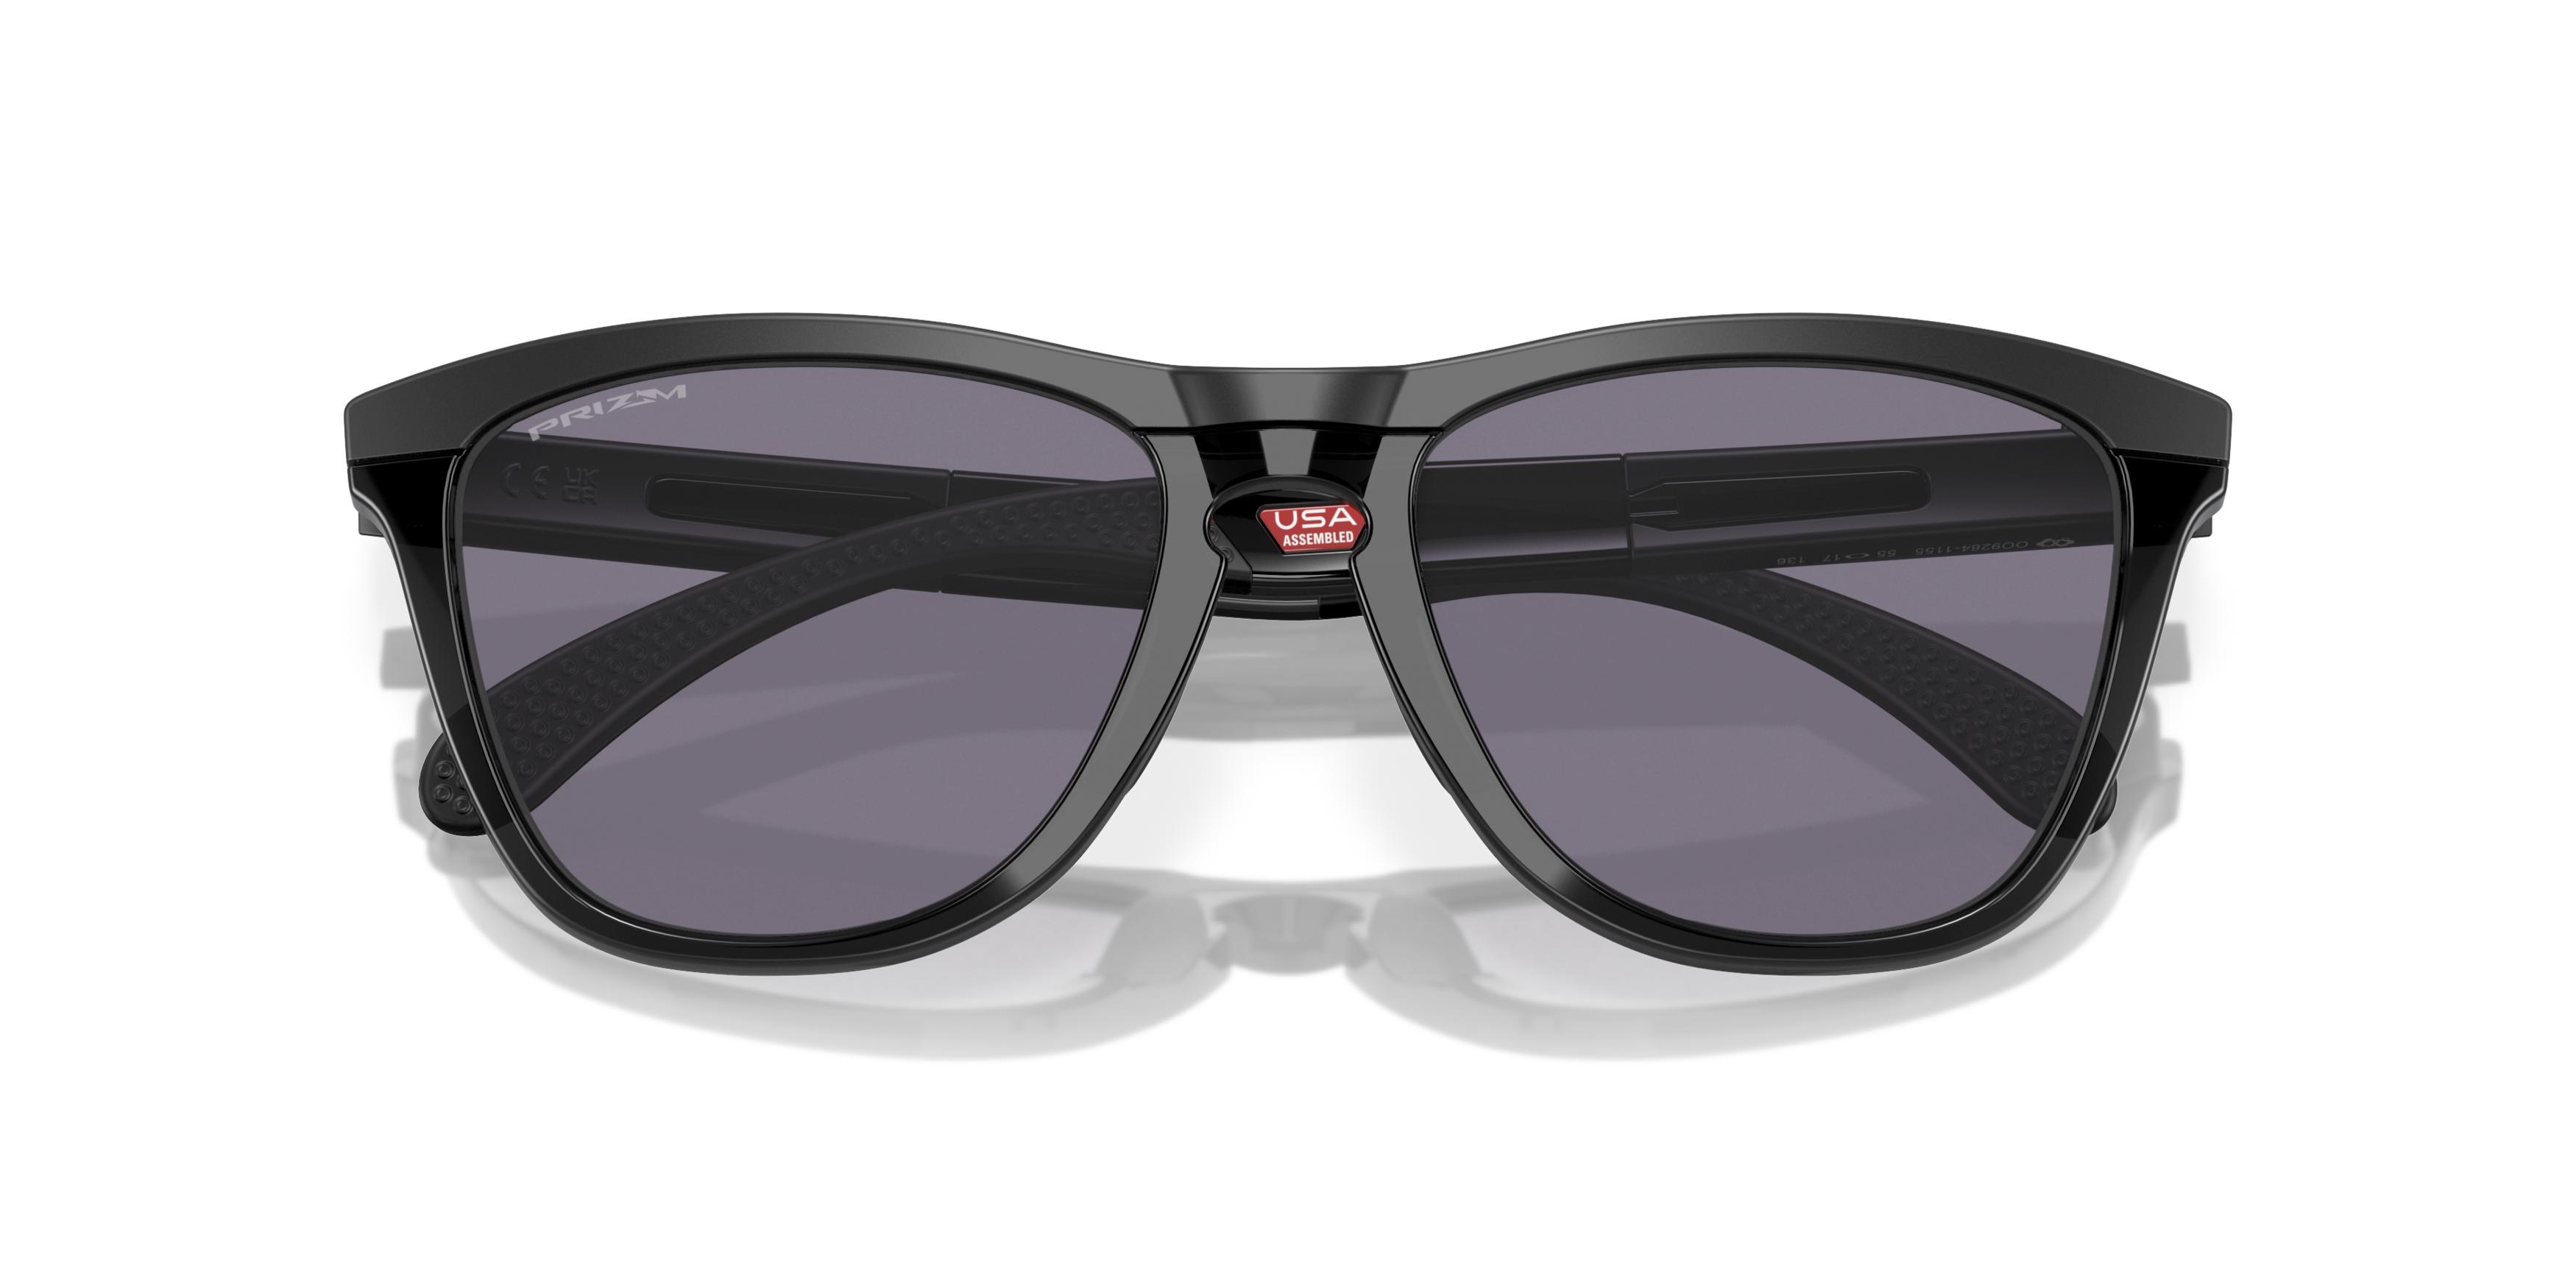 [products.image.folded] OAKLEY OO9284 928411